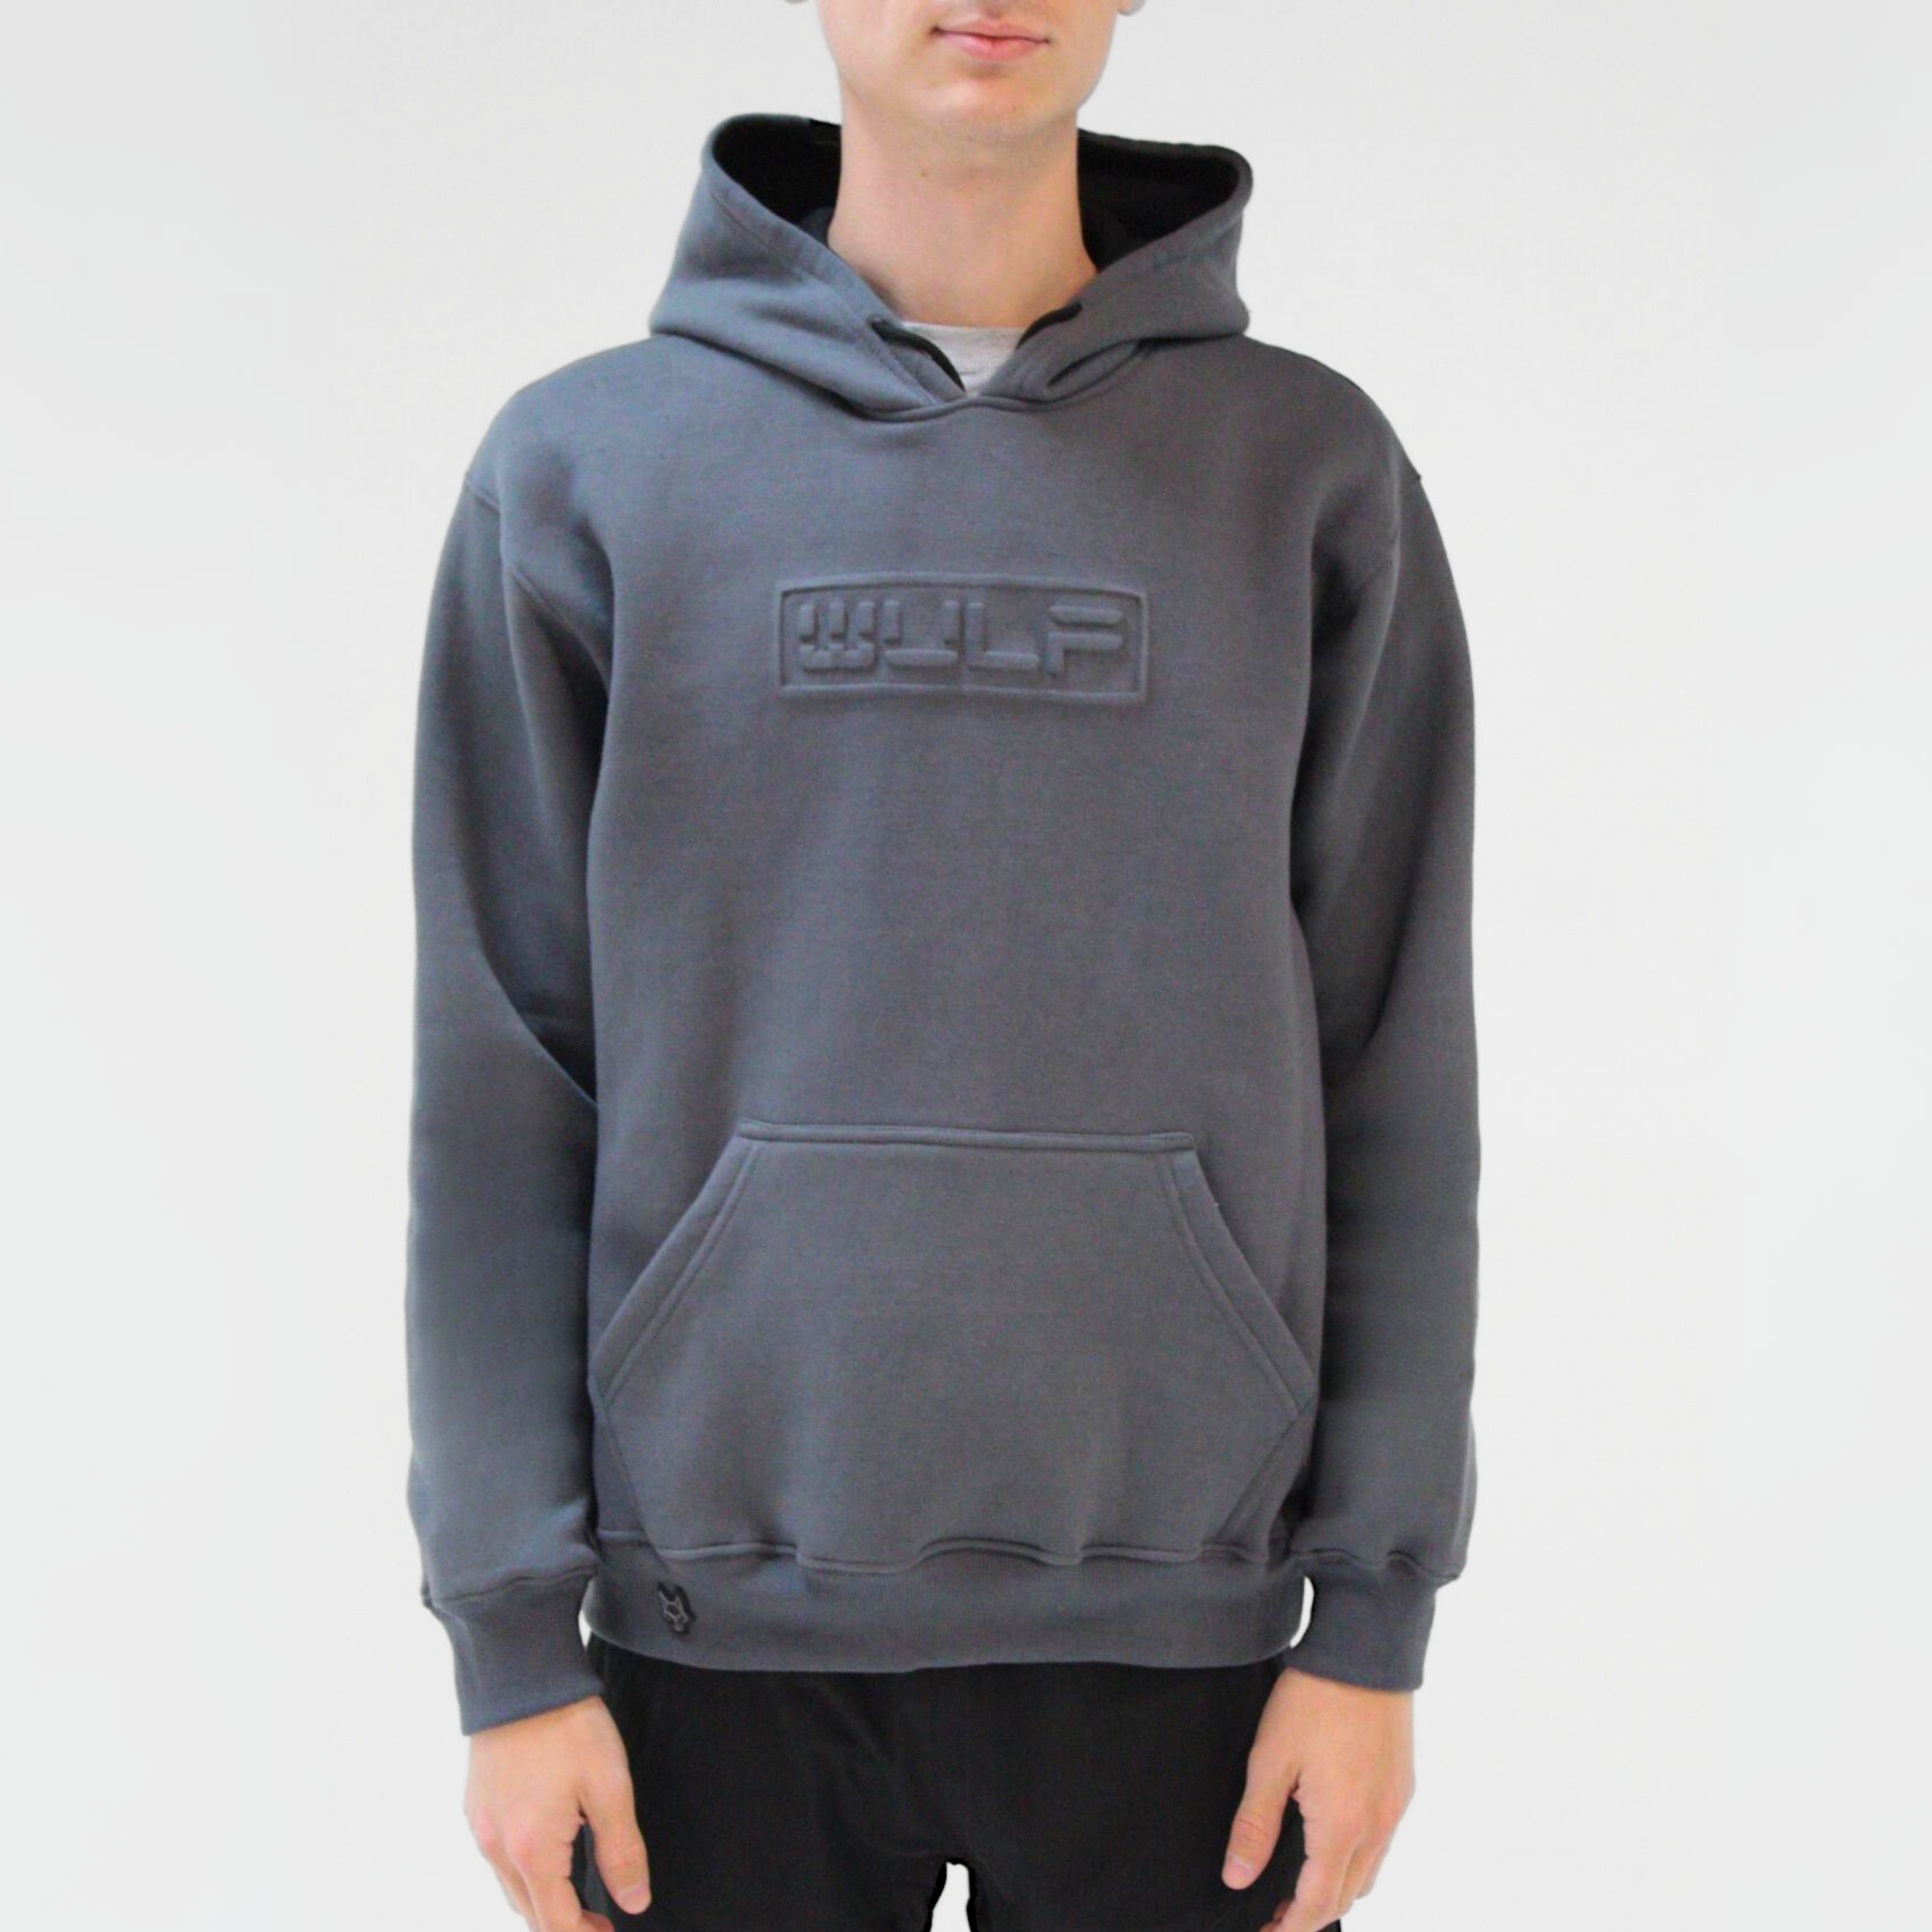 Men's WULF classic Gray Kangaroo Pocket Hoodie with embossed Wulf logo is a classic complement to your wardrobe featuring cotton fleece, a drawstring hood, and Wulf icon.